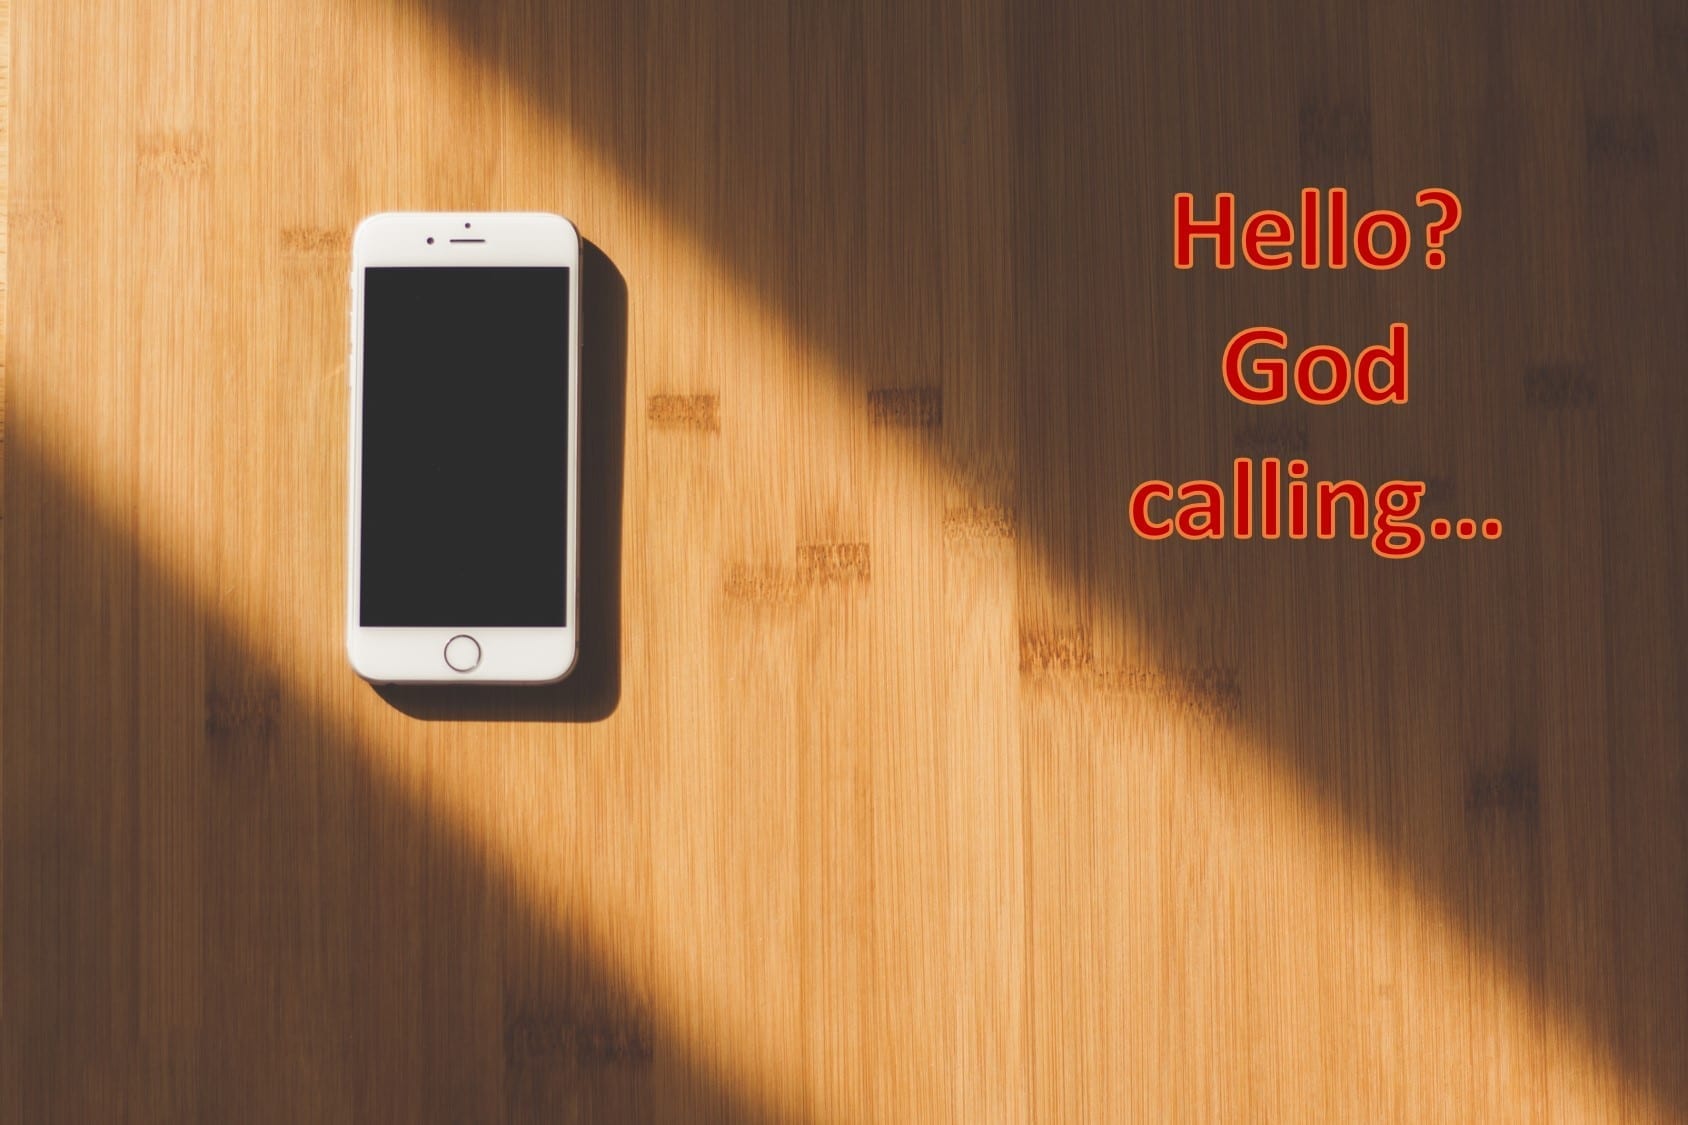 Cellephone on table, text saying "Hello? God calling..."; image via Negative Space on www.pexels.com by CC0; text added by author.